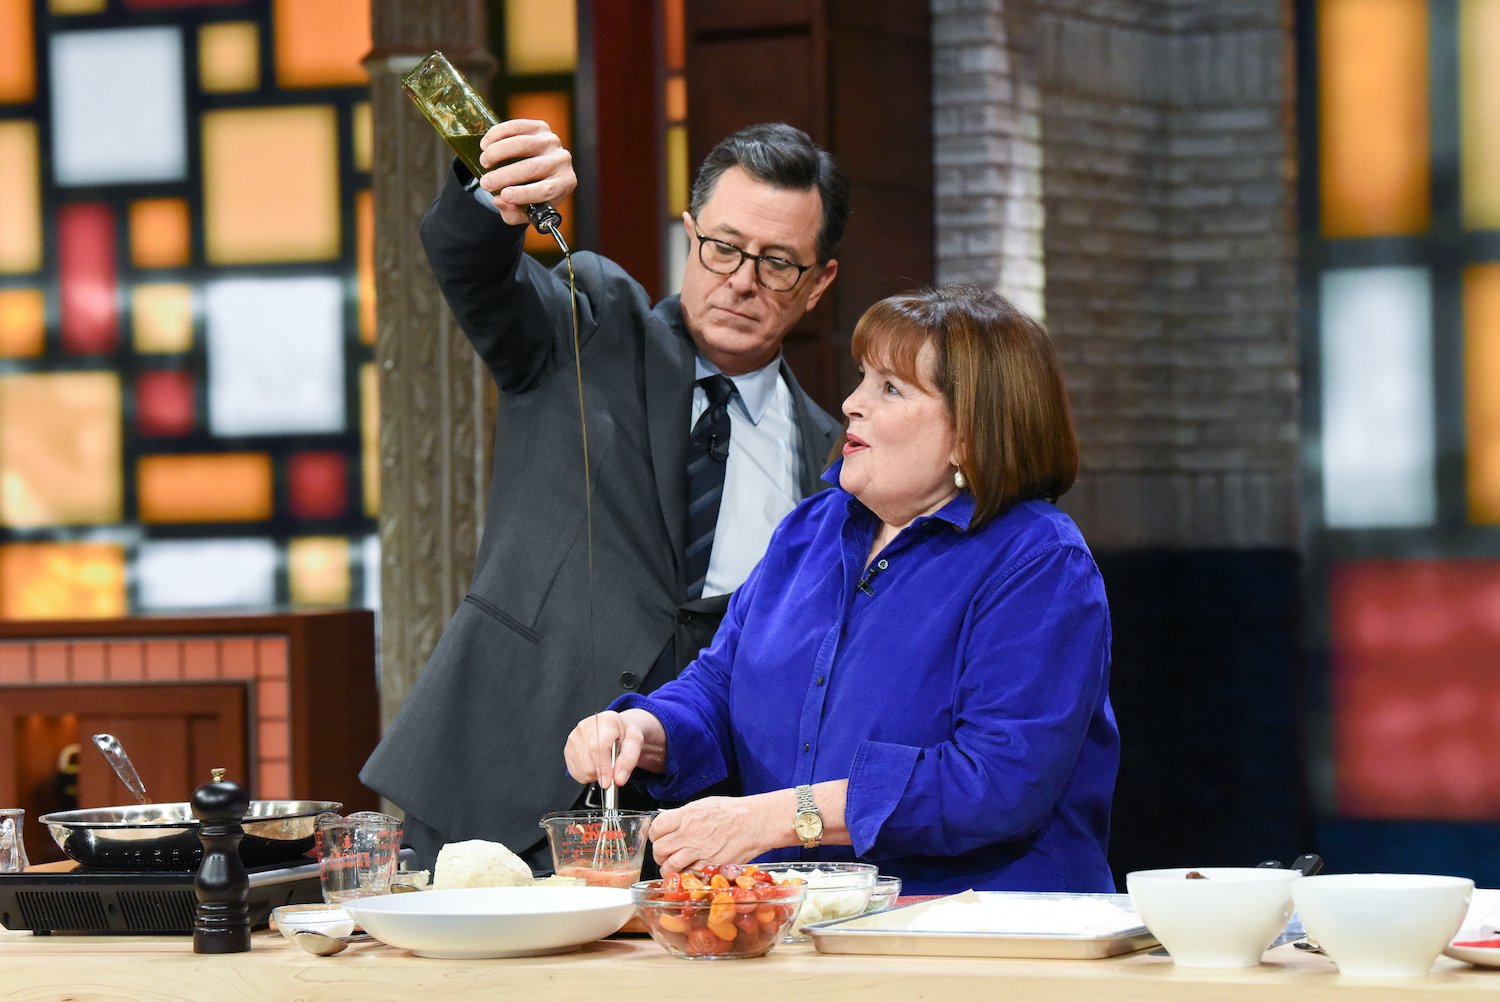 Ina Garten wears a vibrant blue shirt while cooking with Stephen Colbert on The Late Show